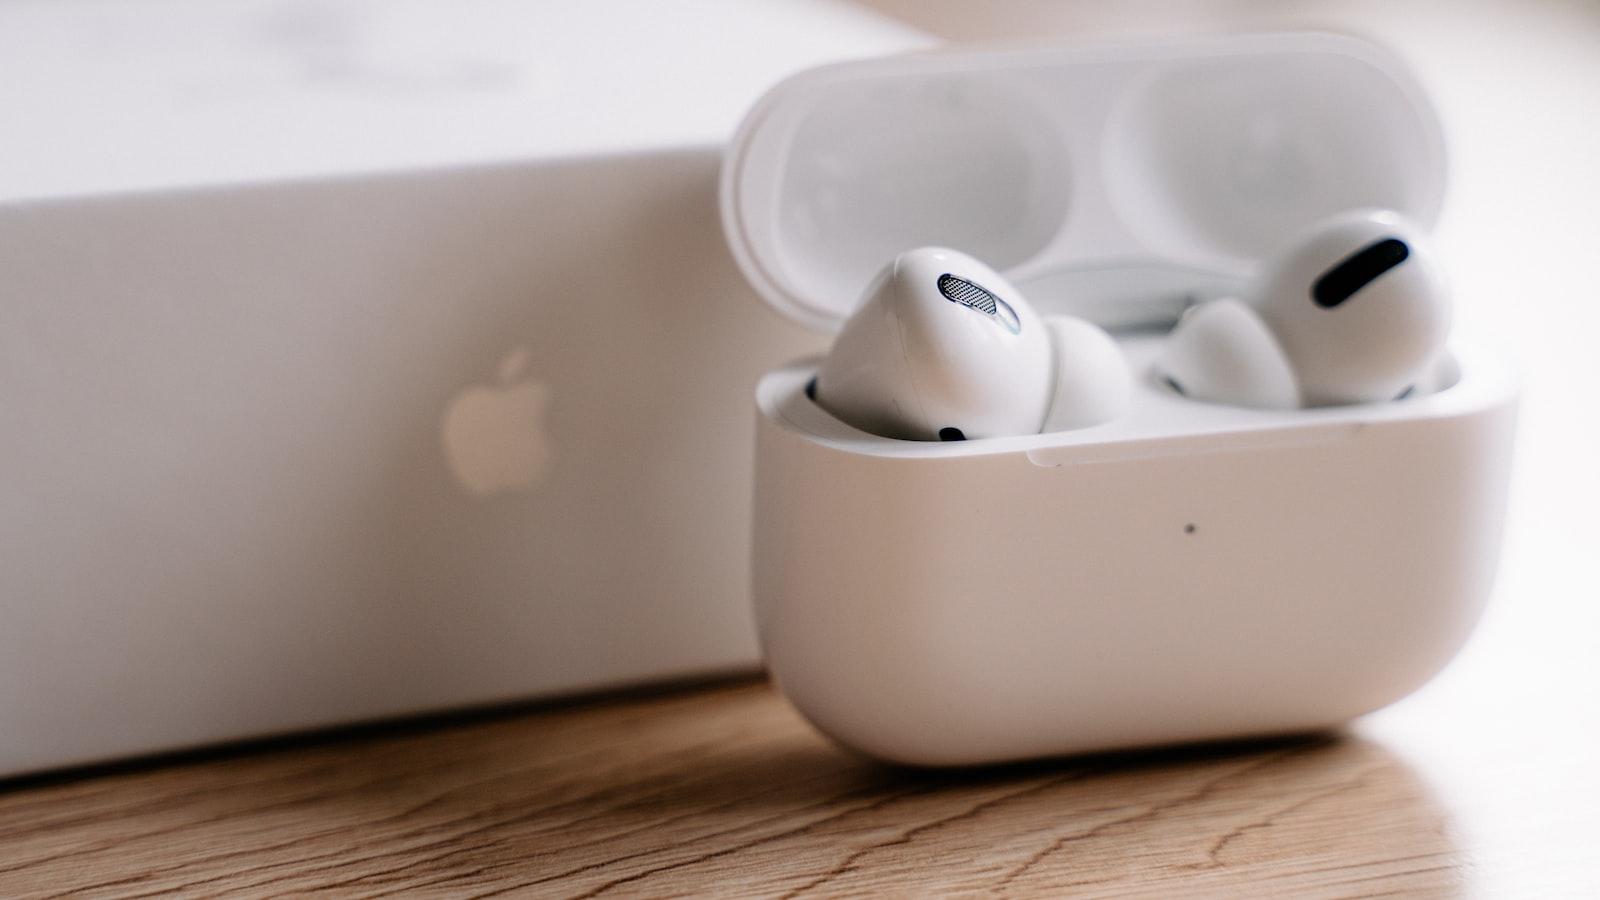 Cyber Monday earbud deals: all the best sales on AirPods, Sony, Beats and more